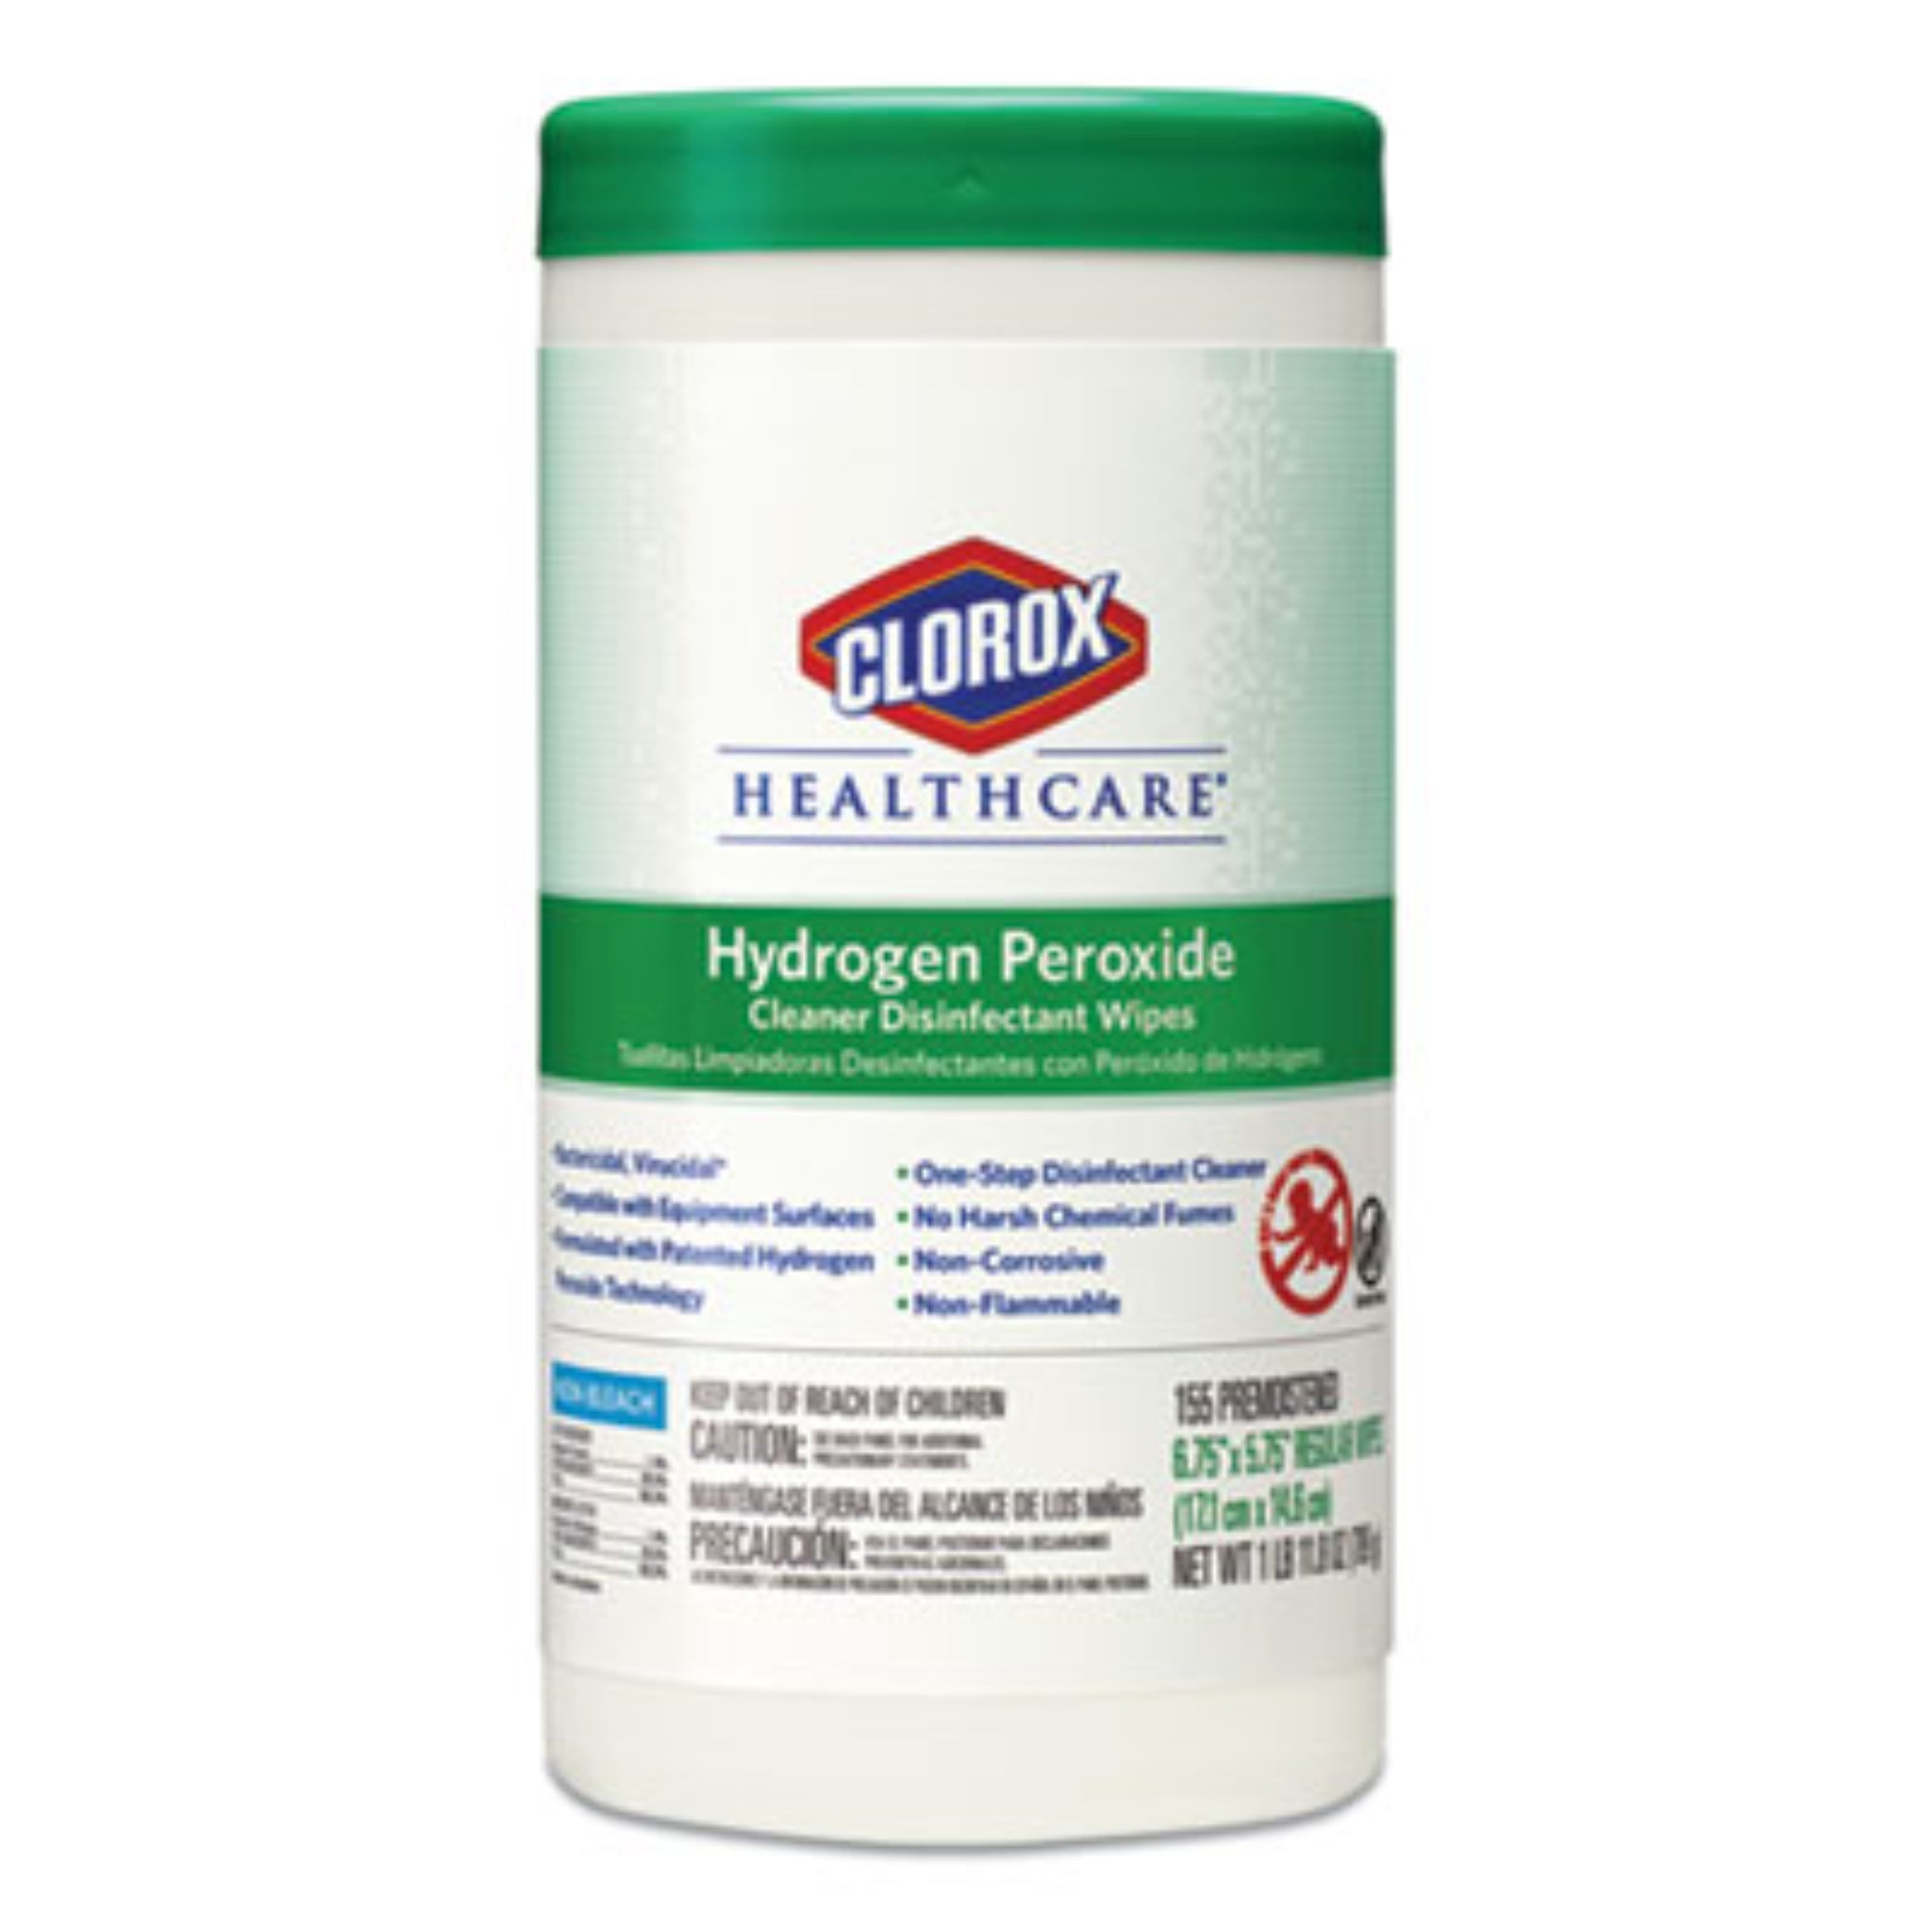 CLOROX SALES CO. CLO30825 Hydrogen Peroxide Cleaner Disinfectant Wipes, Front View